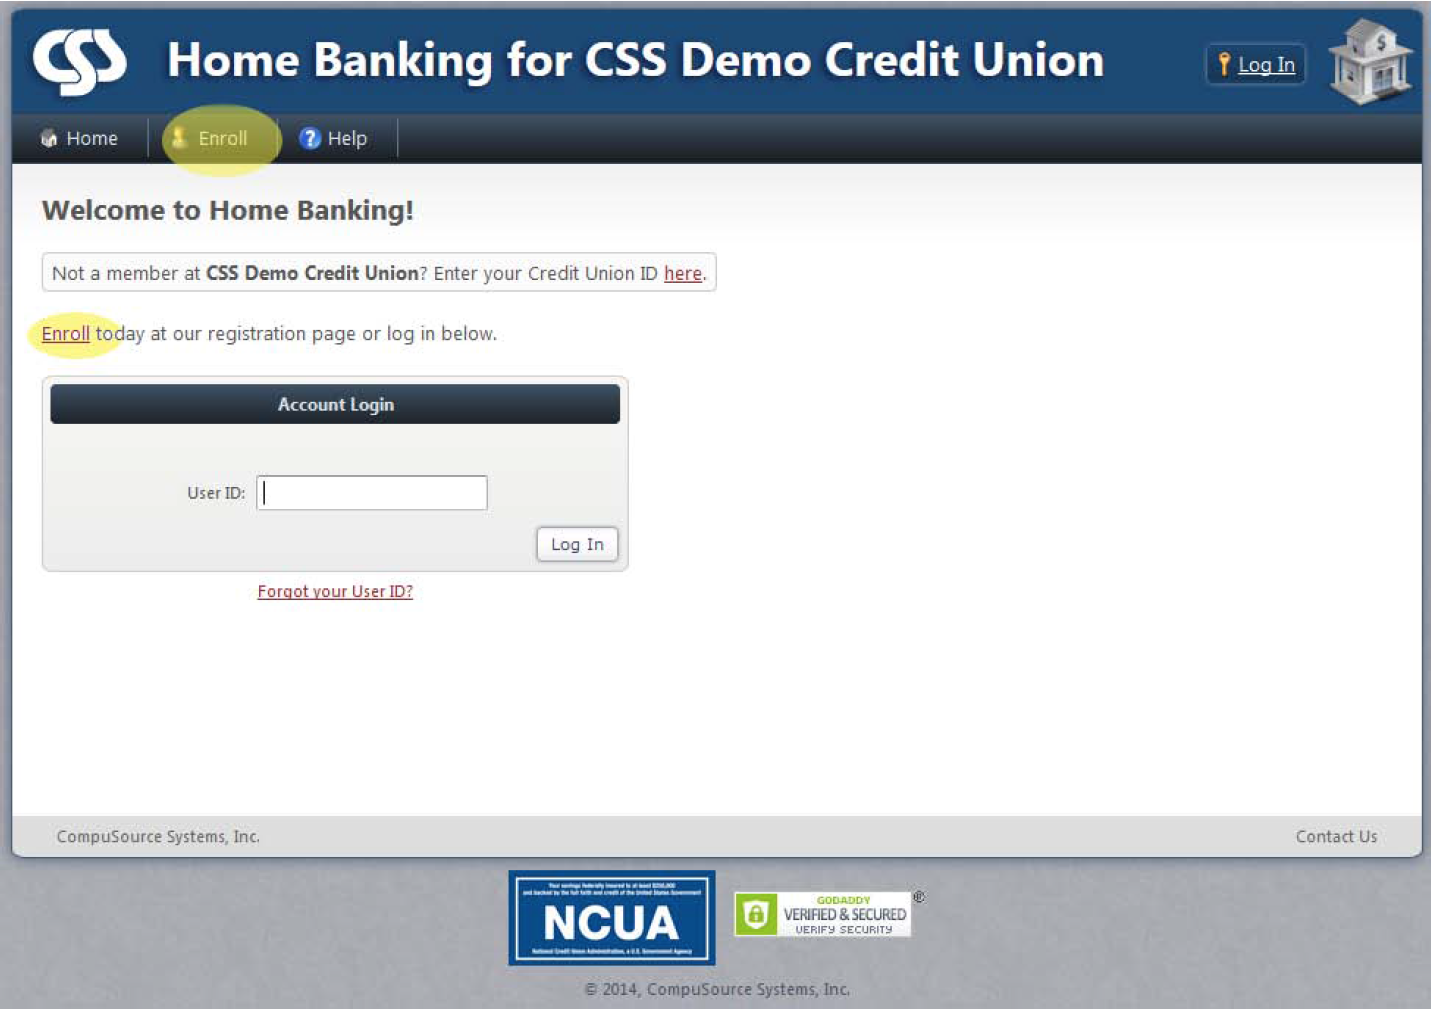 Home Banking image instructions